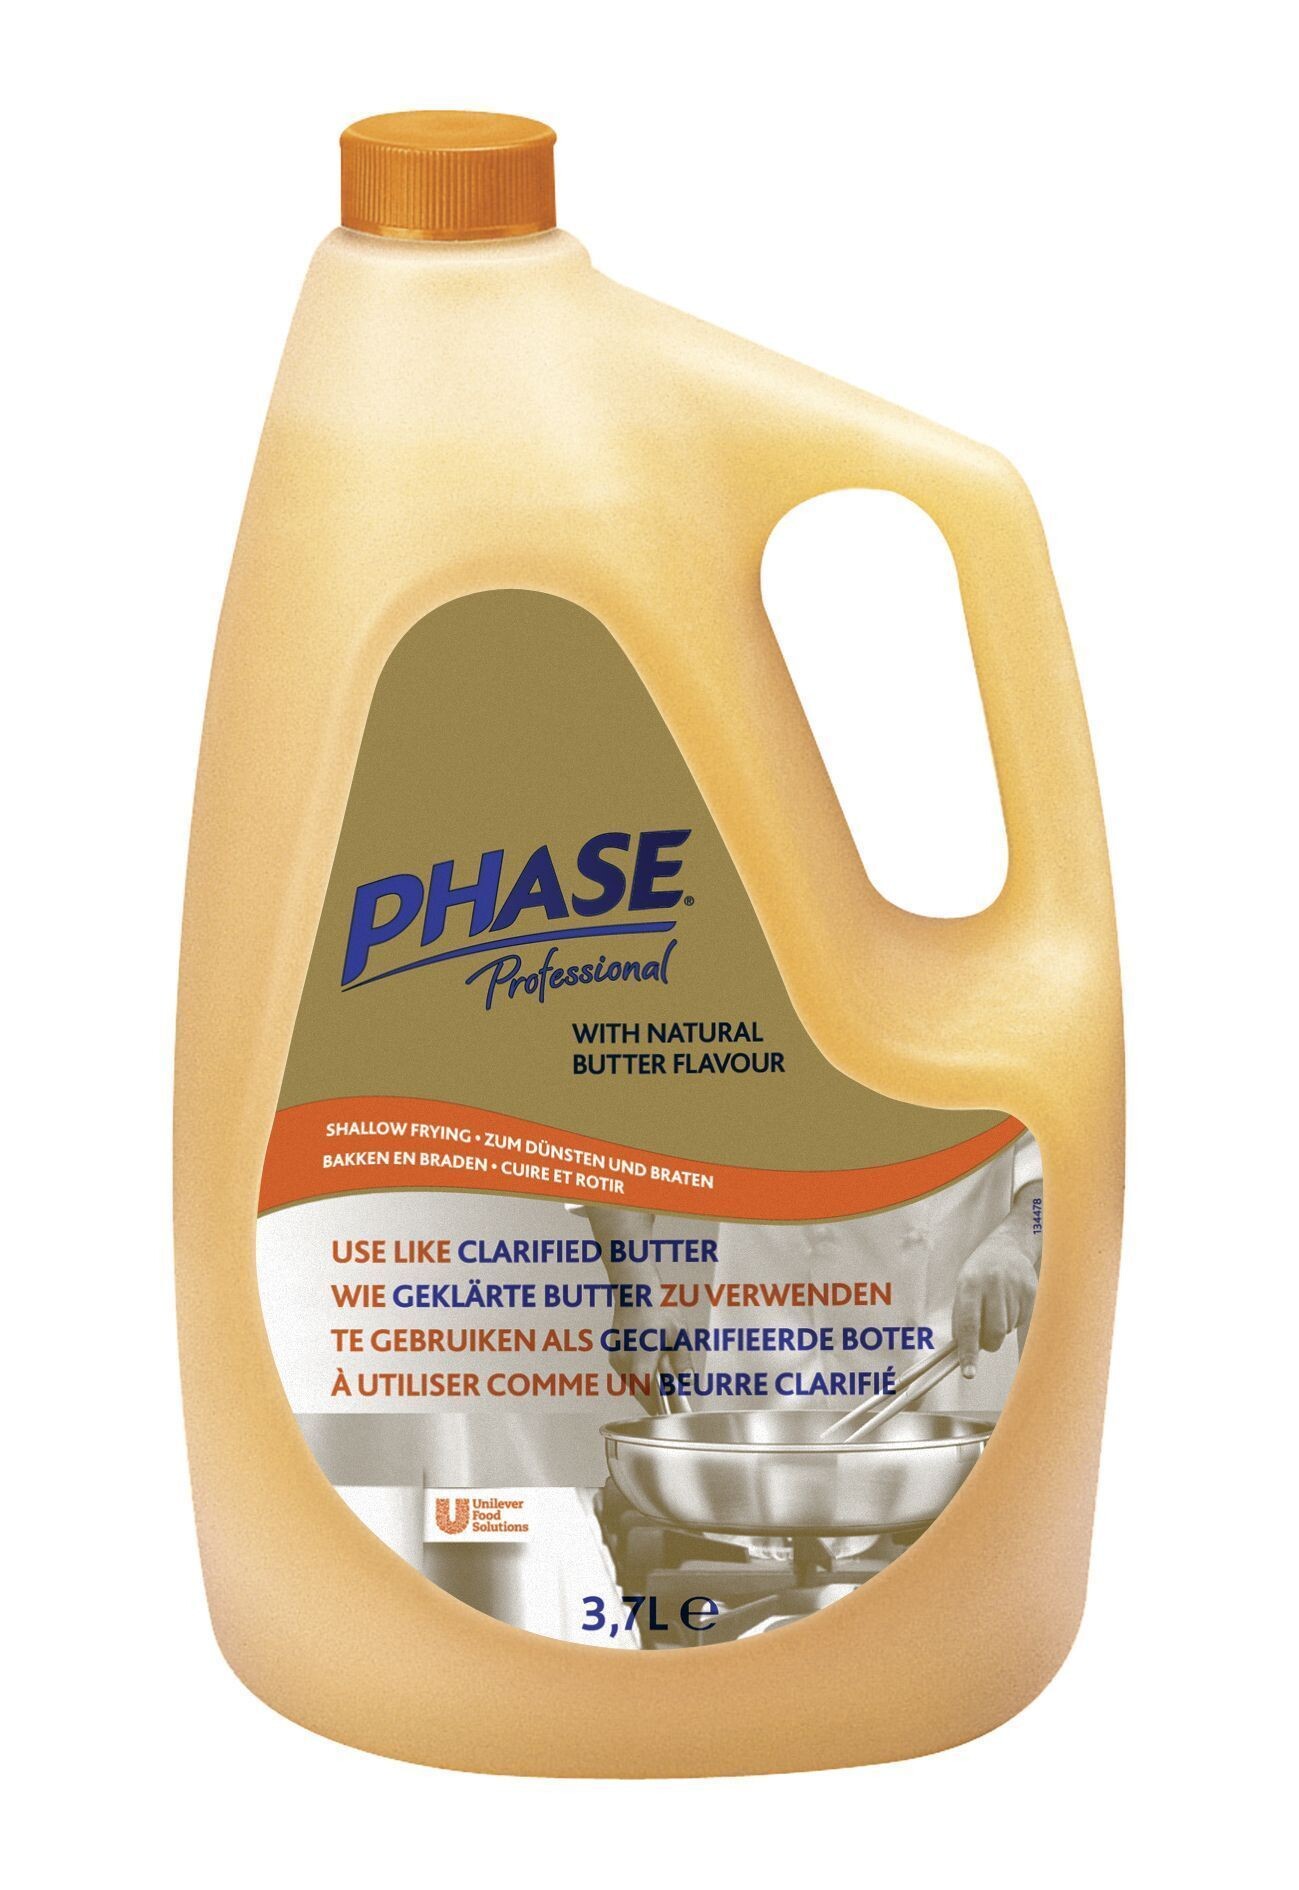 Phase Butter Flavour 3.7L Professional